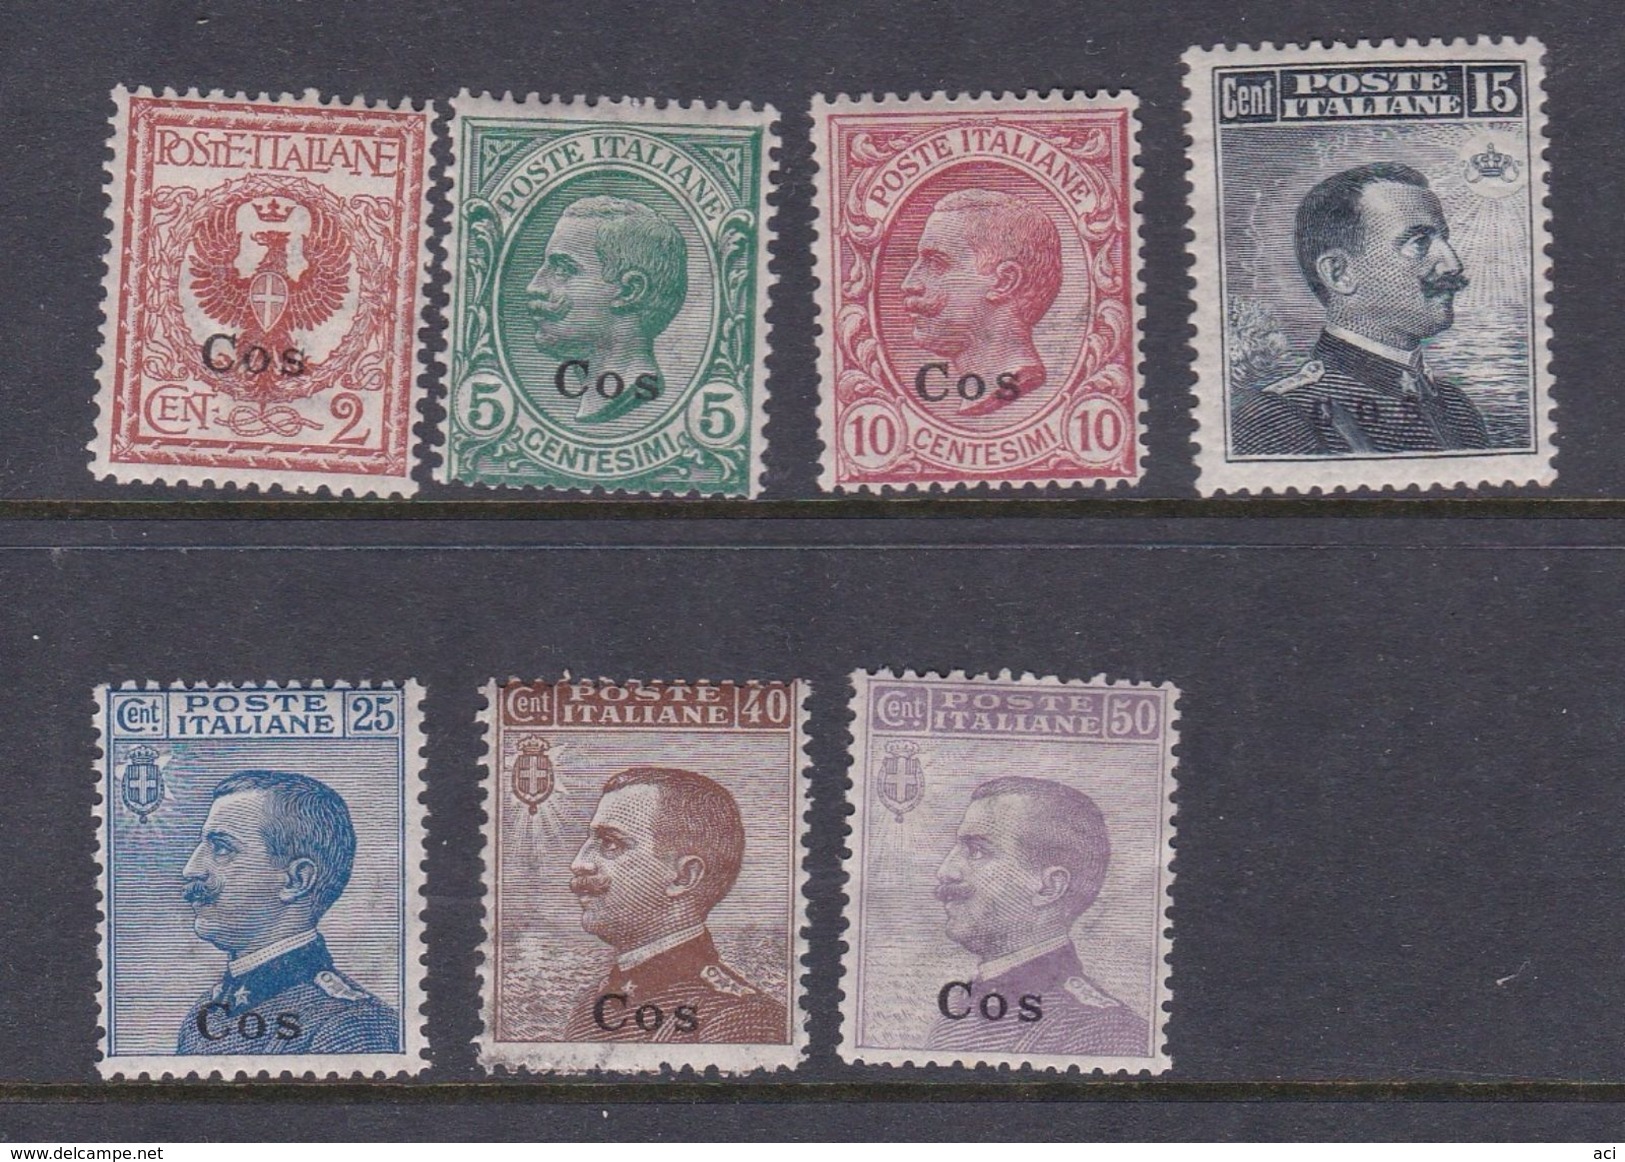 Italy-Colonies And Territories-Aegean-Coo S 1-7  1912 Set, Mint Hinged - Ägäis (Coo)